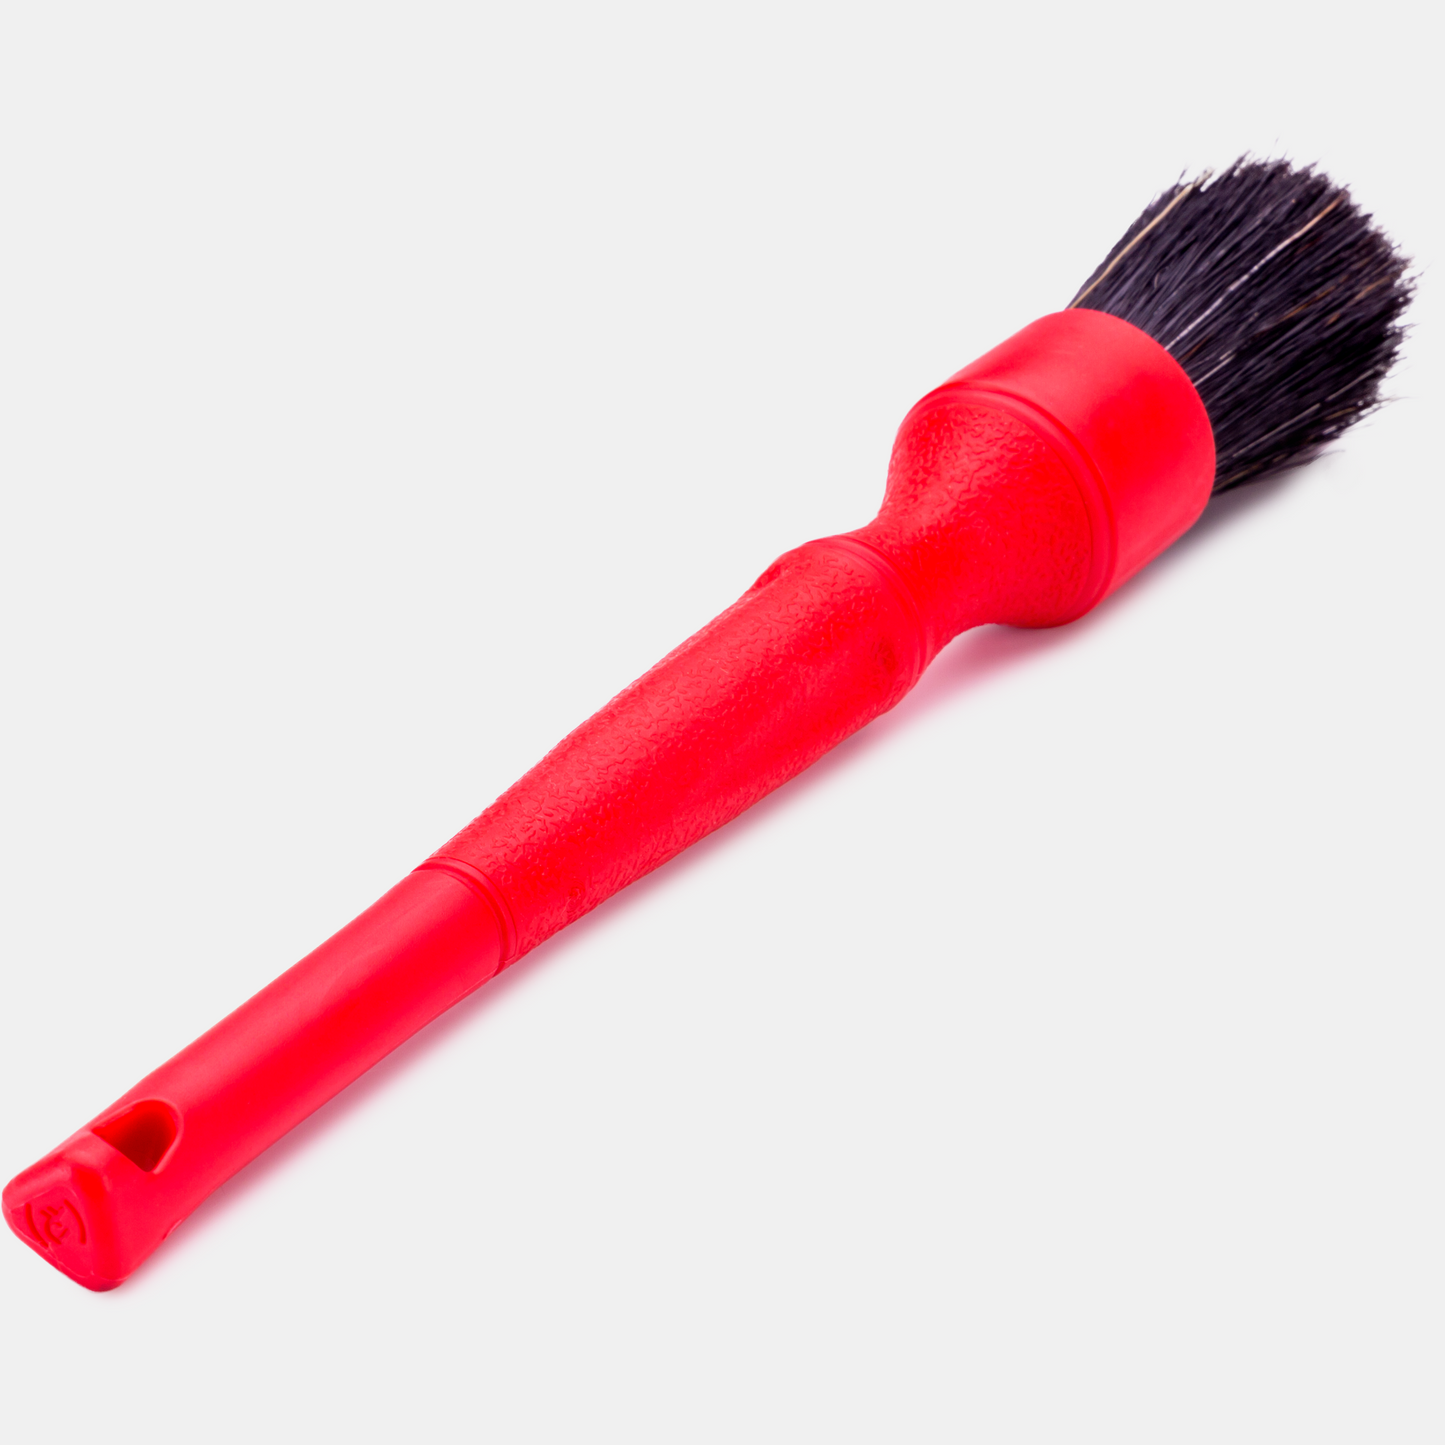 DF Boars Brush (Red) Detail Brush - Large (9.5"/2" Brush by 1")